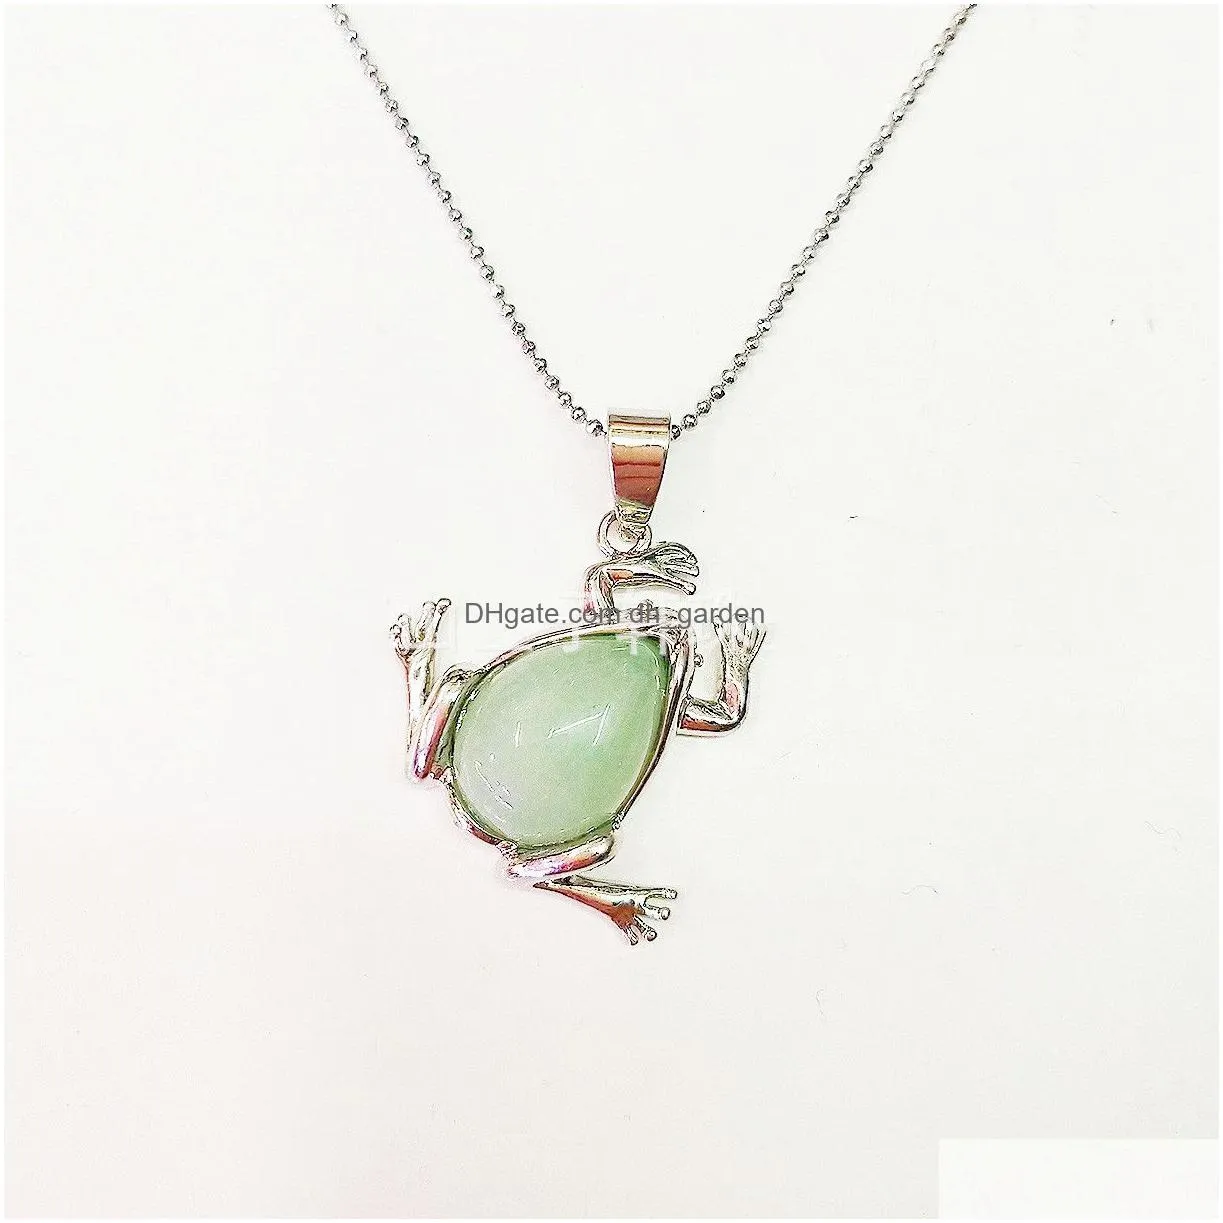 sevenstone natural stone frog metal pendant necklace unisex cute stainless steel bead chain pendant